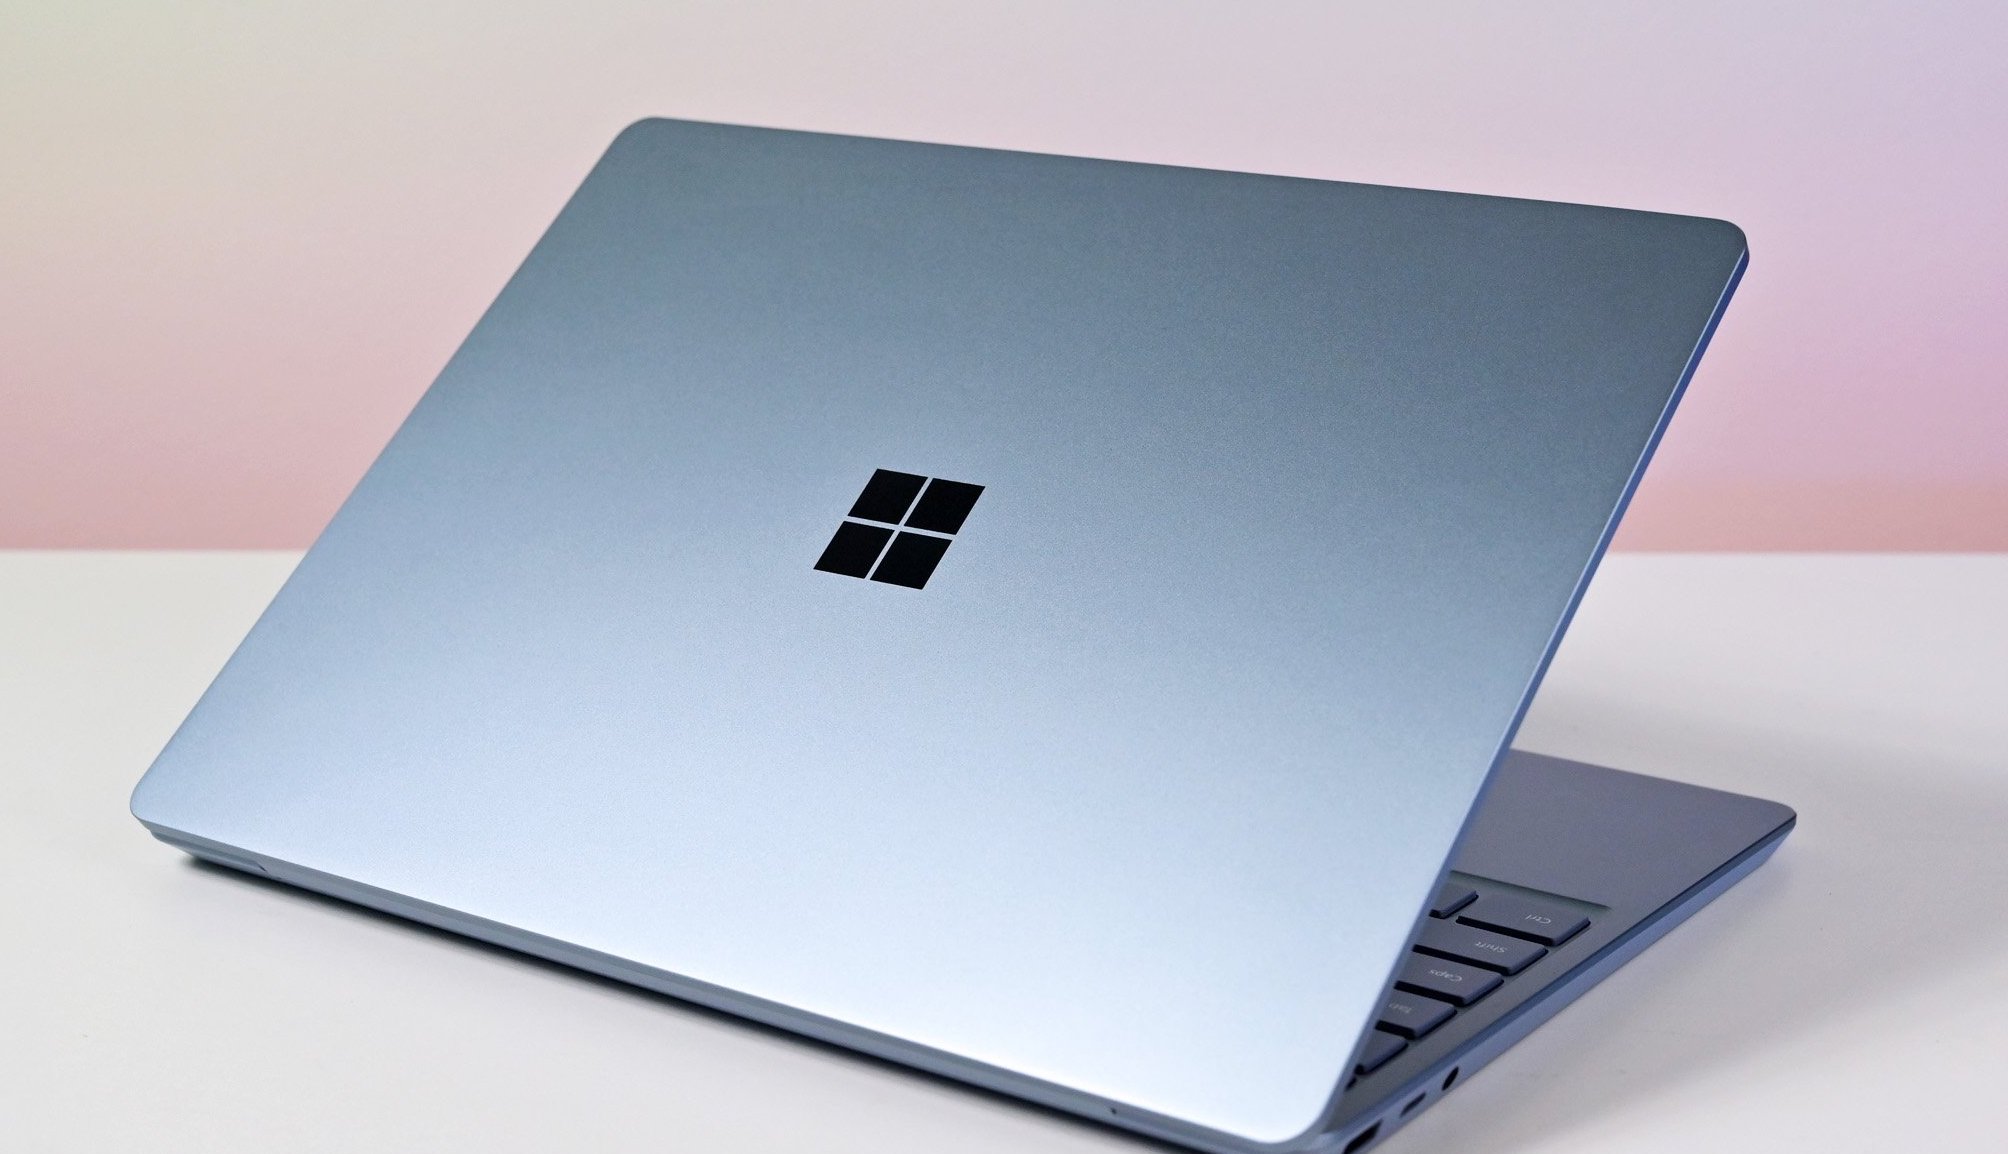 The BEST affordable Windows Laptops to buy in 2022